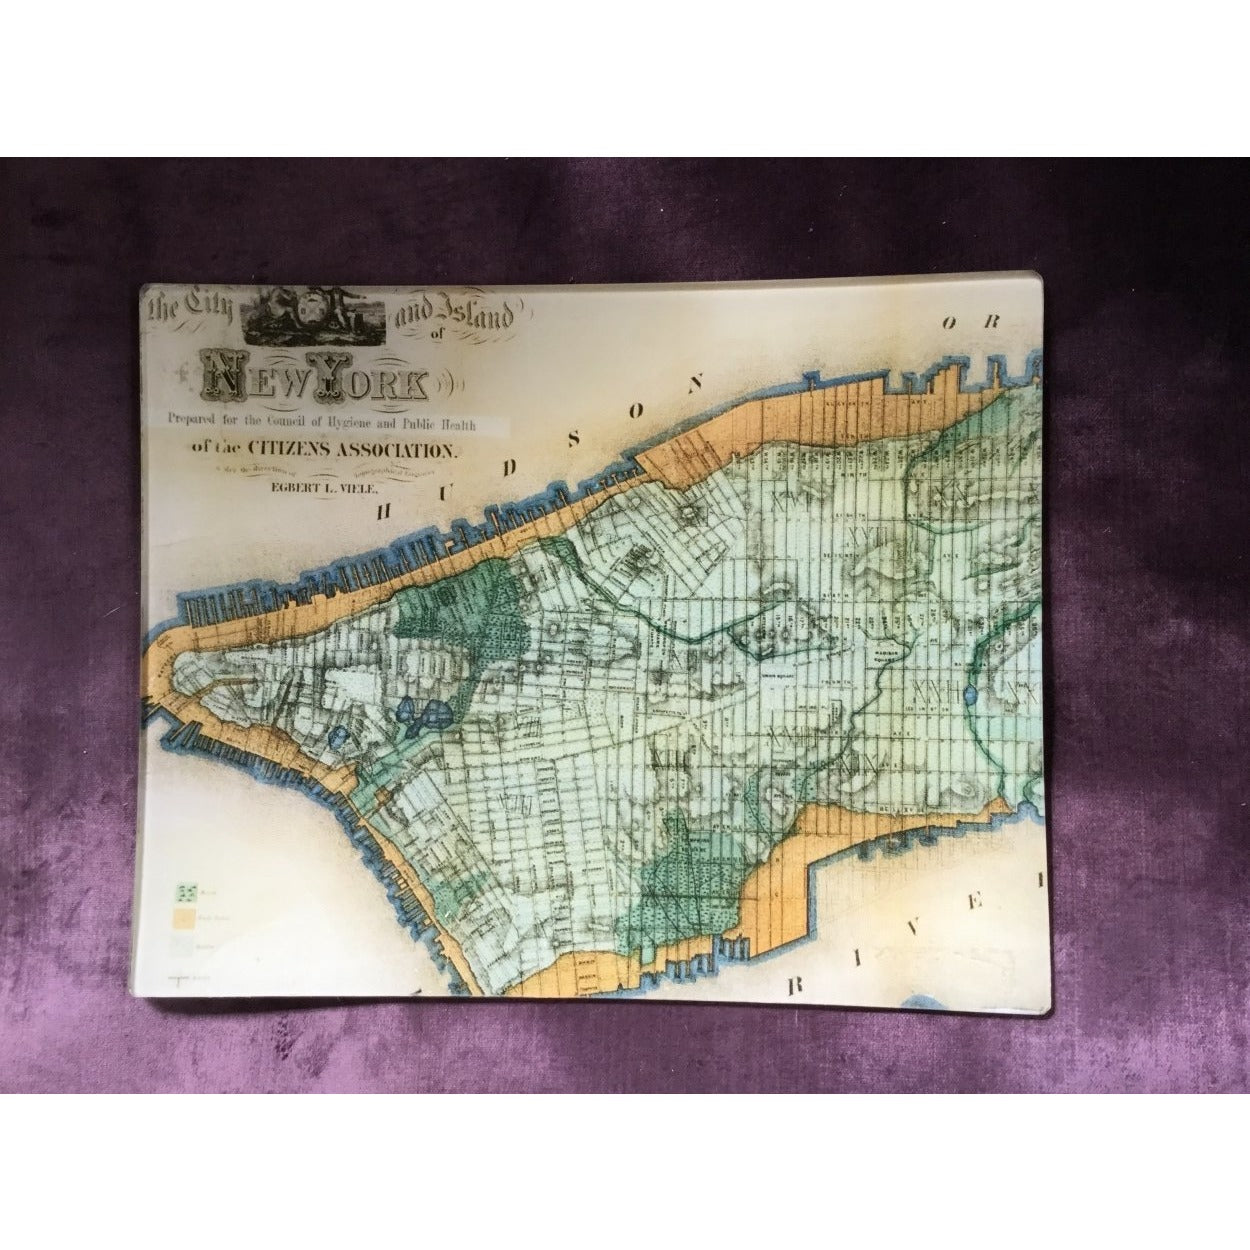 Vintage decoupage glass tray - "Old New York"